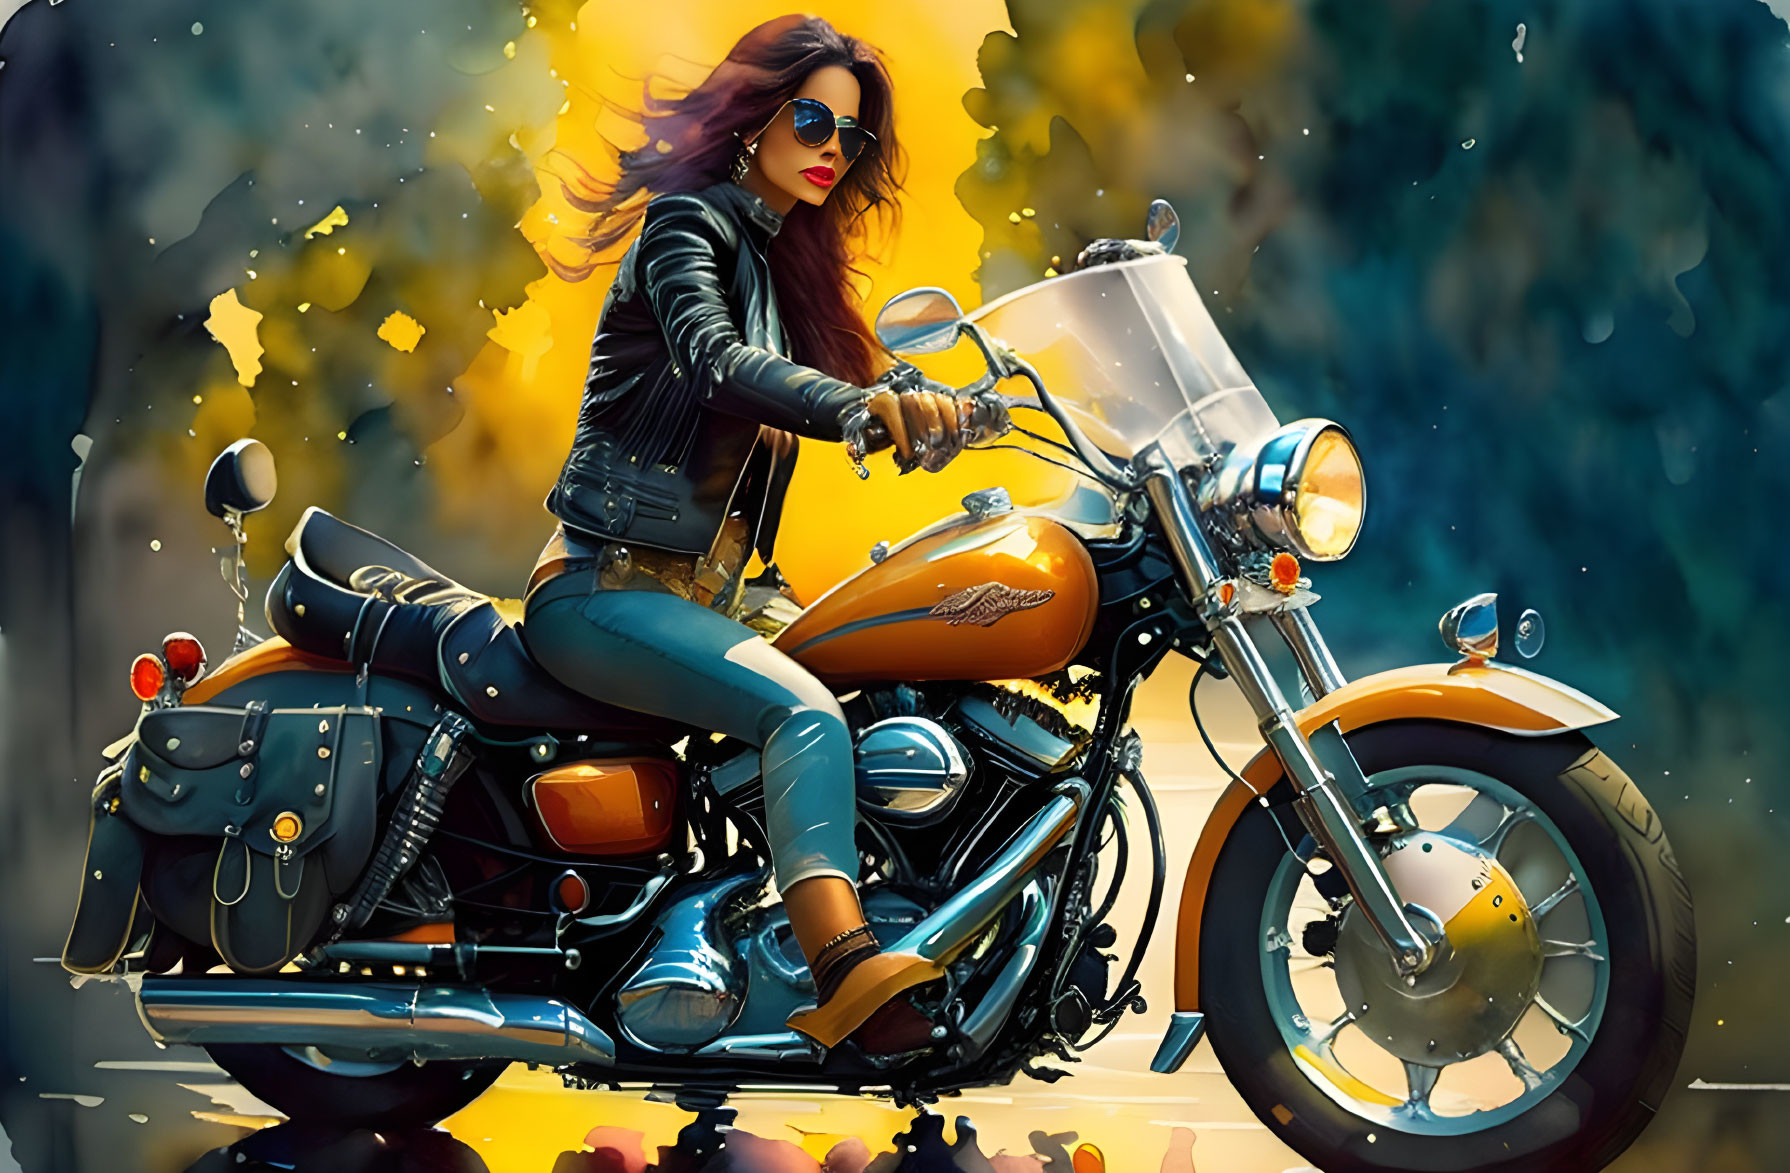 Woman in sunglasses and leather jacket on classic motorcycle against vibrant background